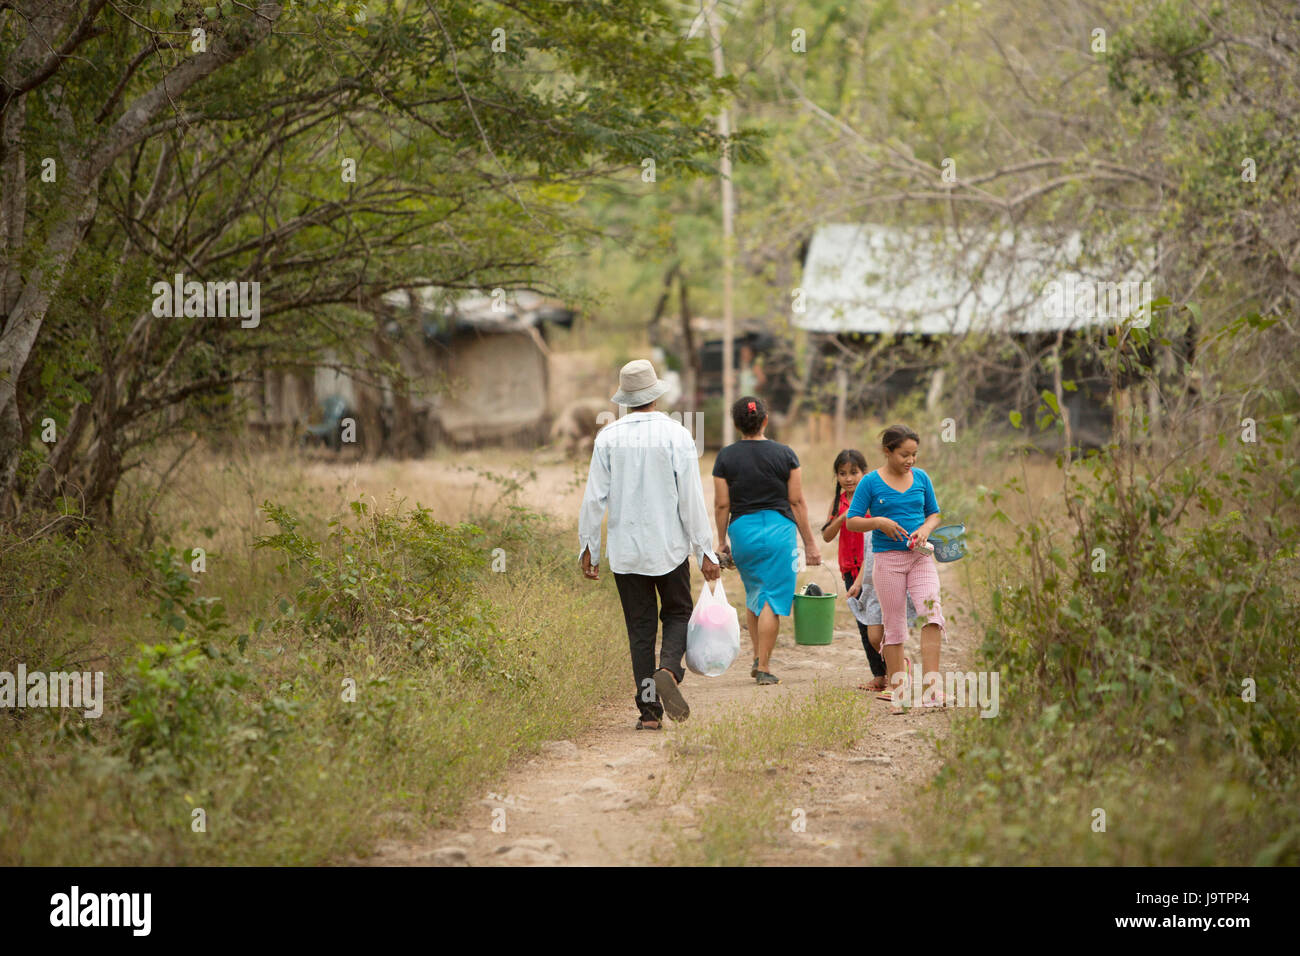 Villagers walk down a dusty road in El Sauce Municipality, Léon Department, Nicaragua. Stock Photo